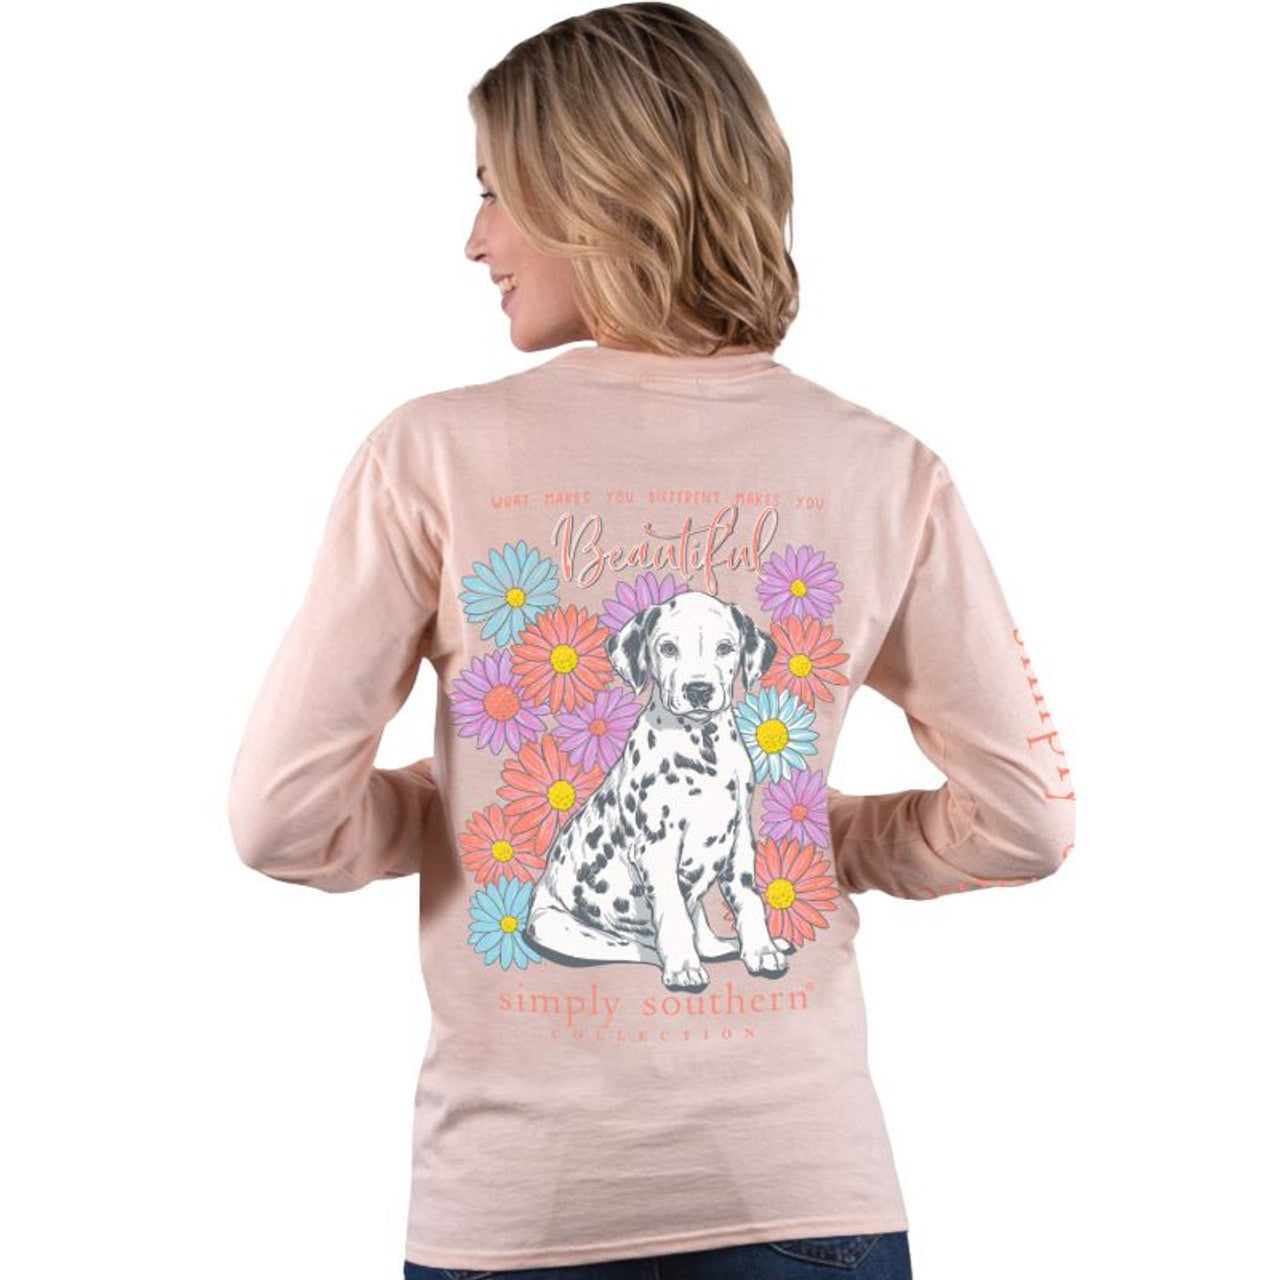 Simply Southern model wearing a long sleeve shirt with a Dalmatian on the back surrounded by flowers.